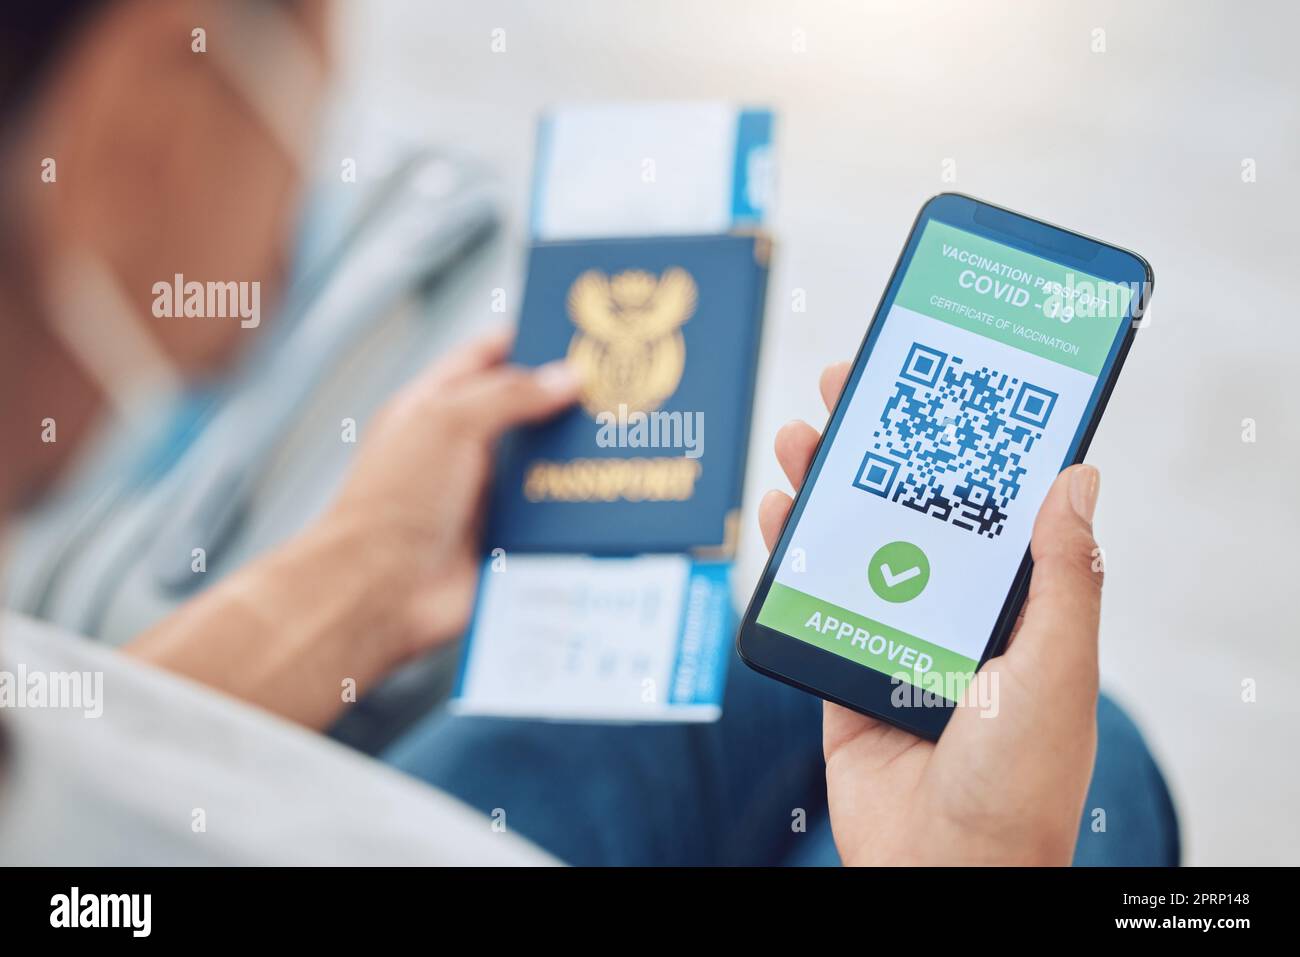 Covid vaccine passport on a phone for travel, safety or security in global pandemic. Airport, smartphone app with digital health certificate qr code and South Africa book for international traveling Stock Photo